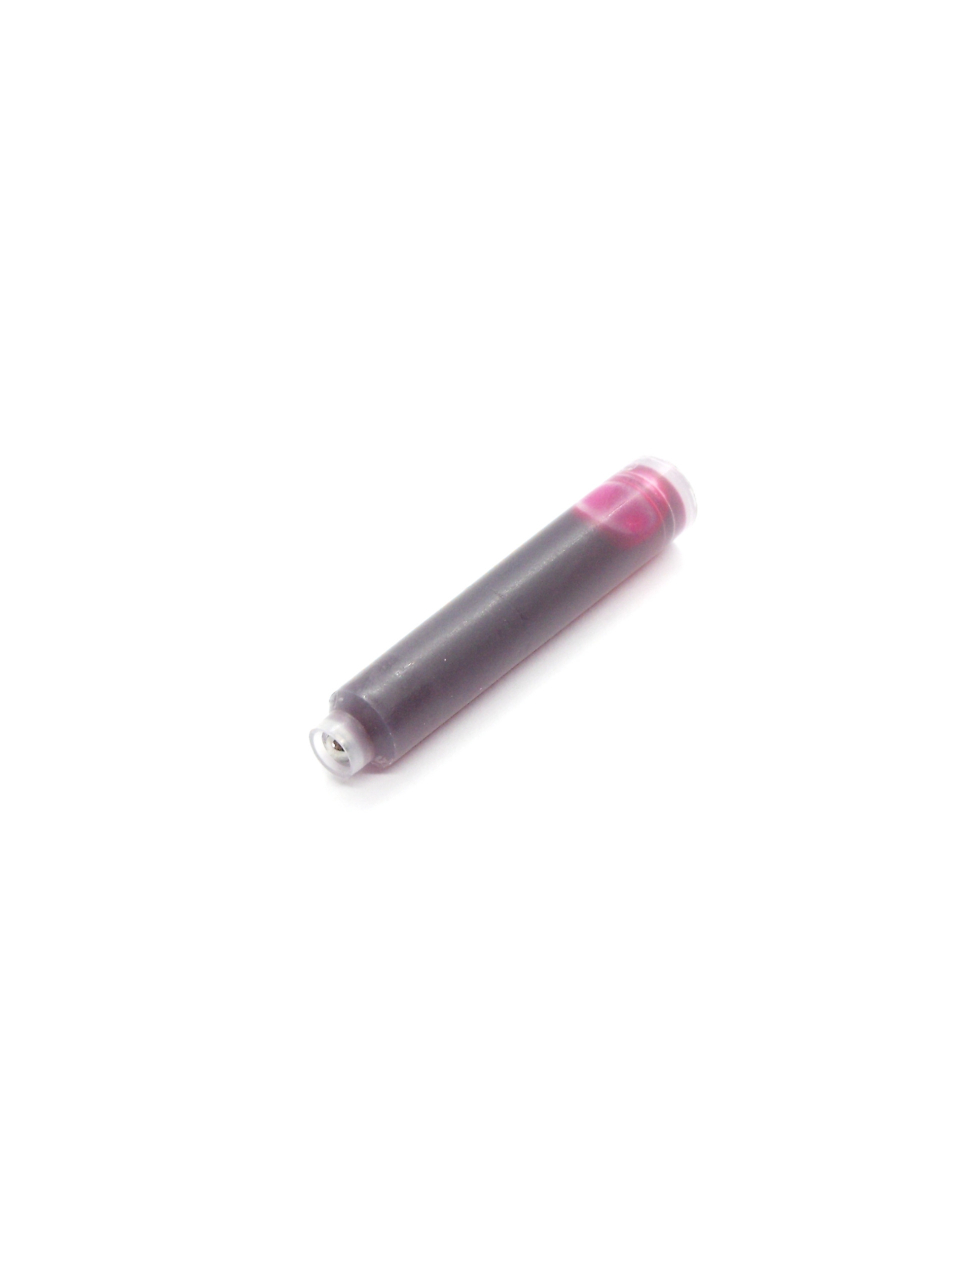 Cartridges For 3952 Fountain Pens (Pink)